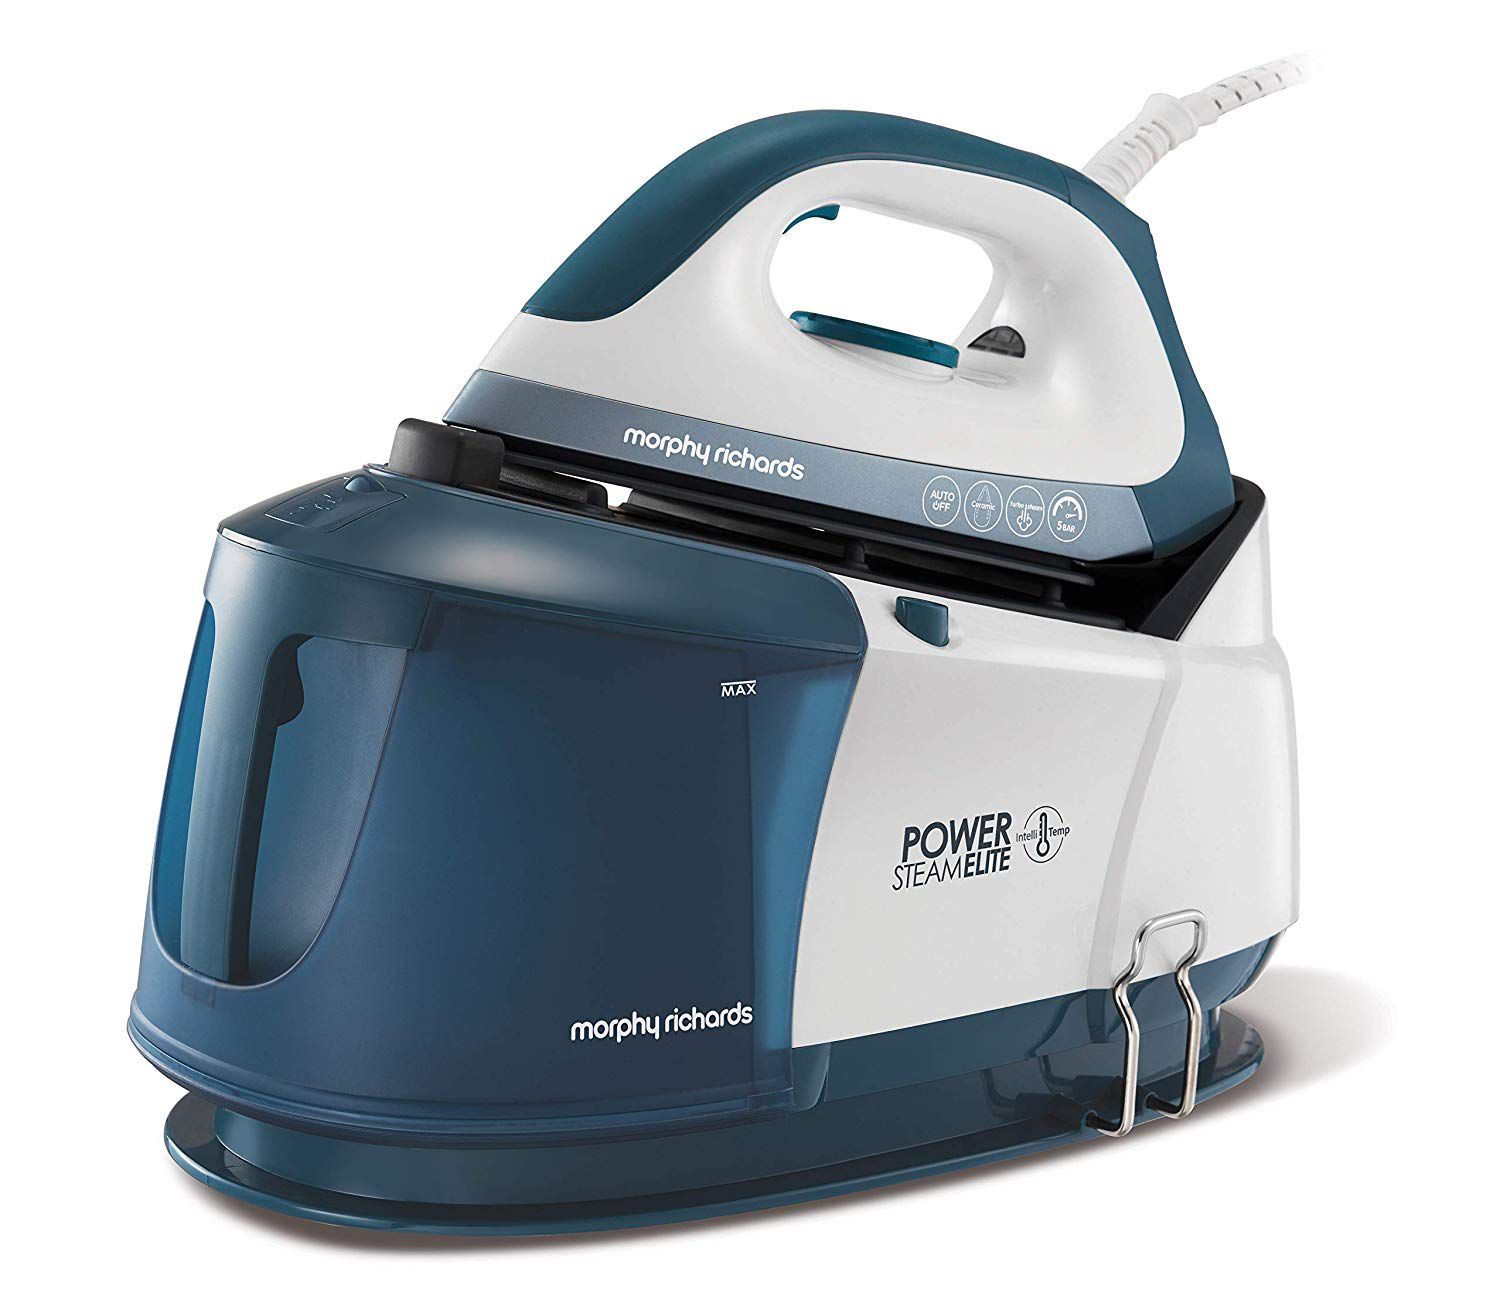 Morphy Richards Morphy Richards Steam Iron Light Glide 100 Blue Corded Compact Ceramic Soleplate 